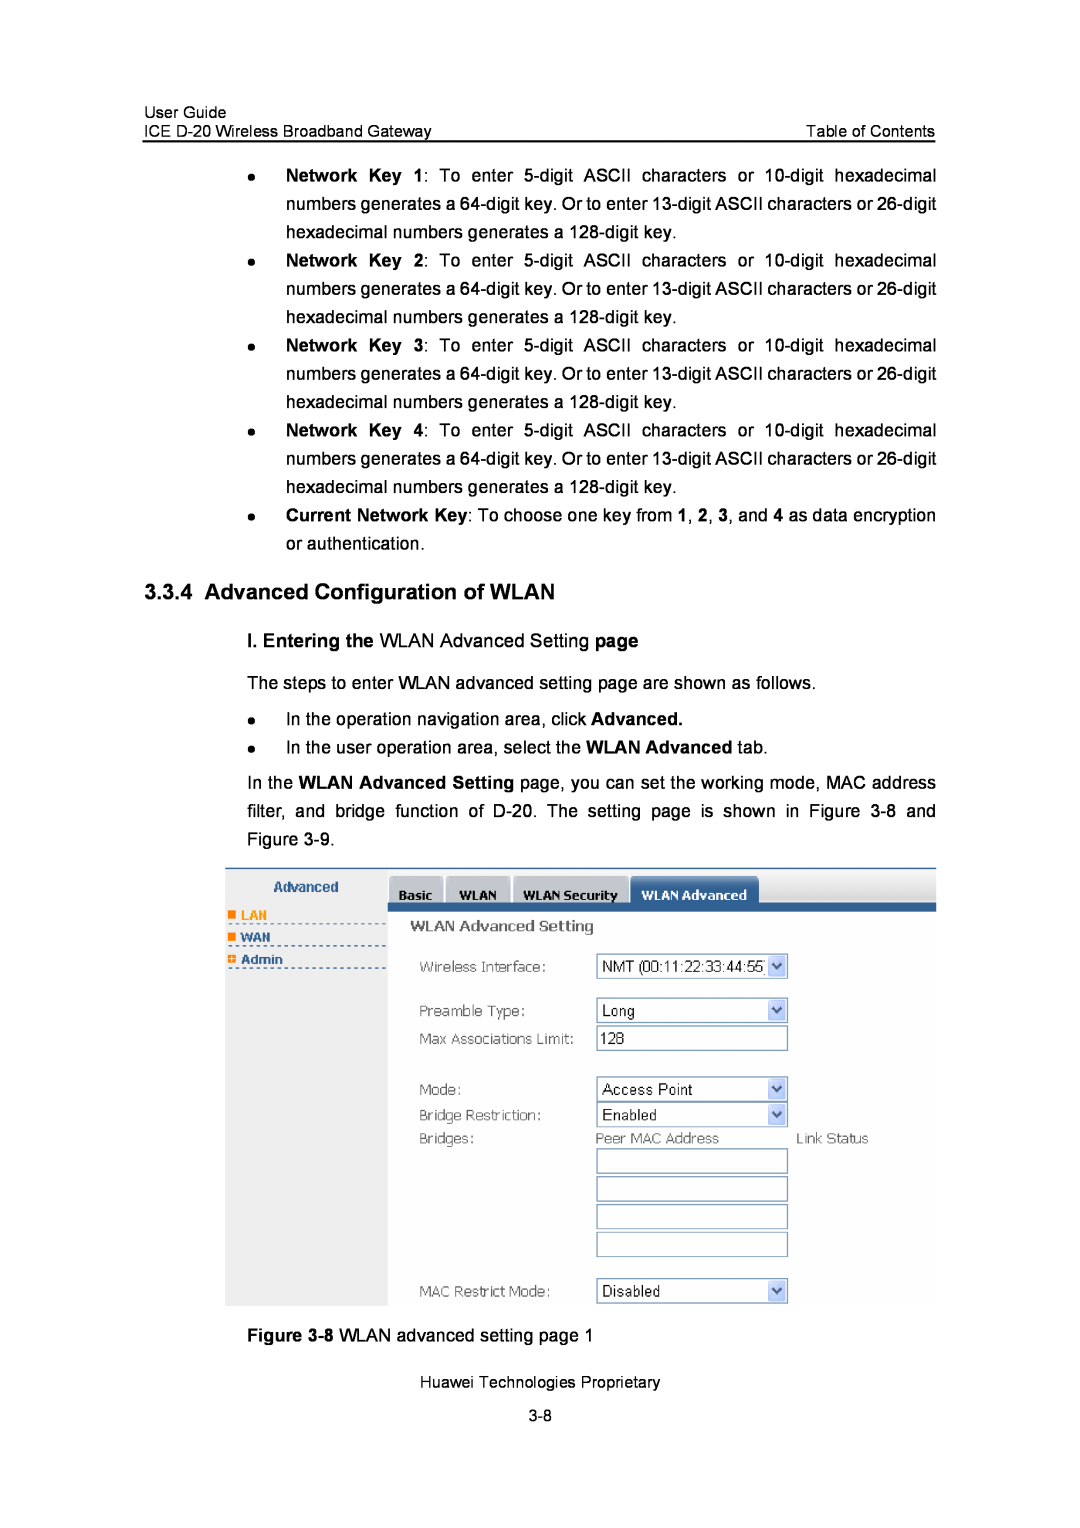 Insignia ICE D-20 EC506 manual Advanced Configuration of WLAN, I. Entering the WLAN Advanced Setting page 